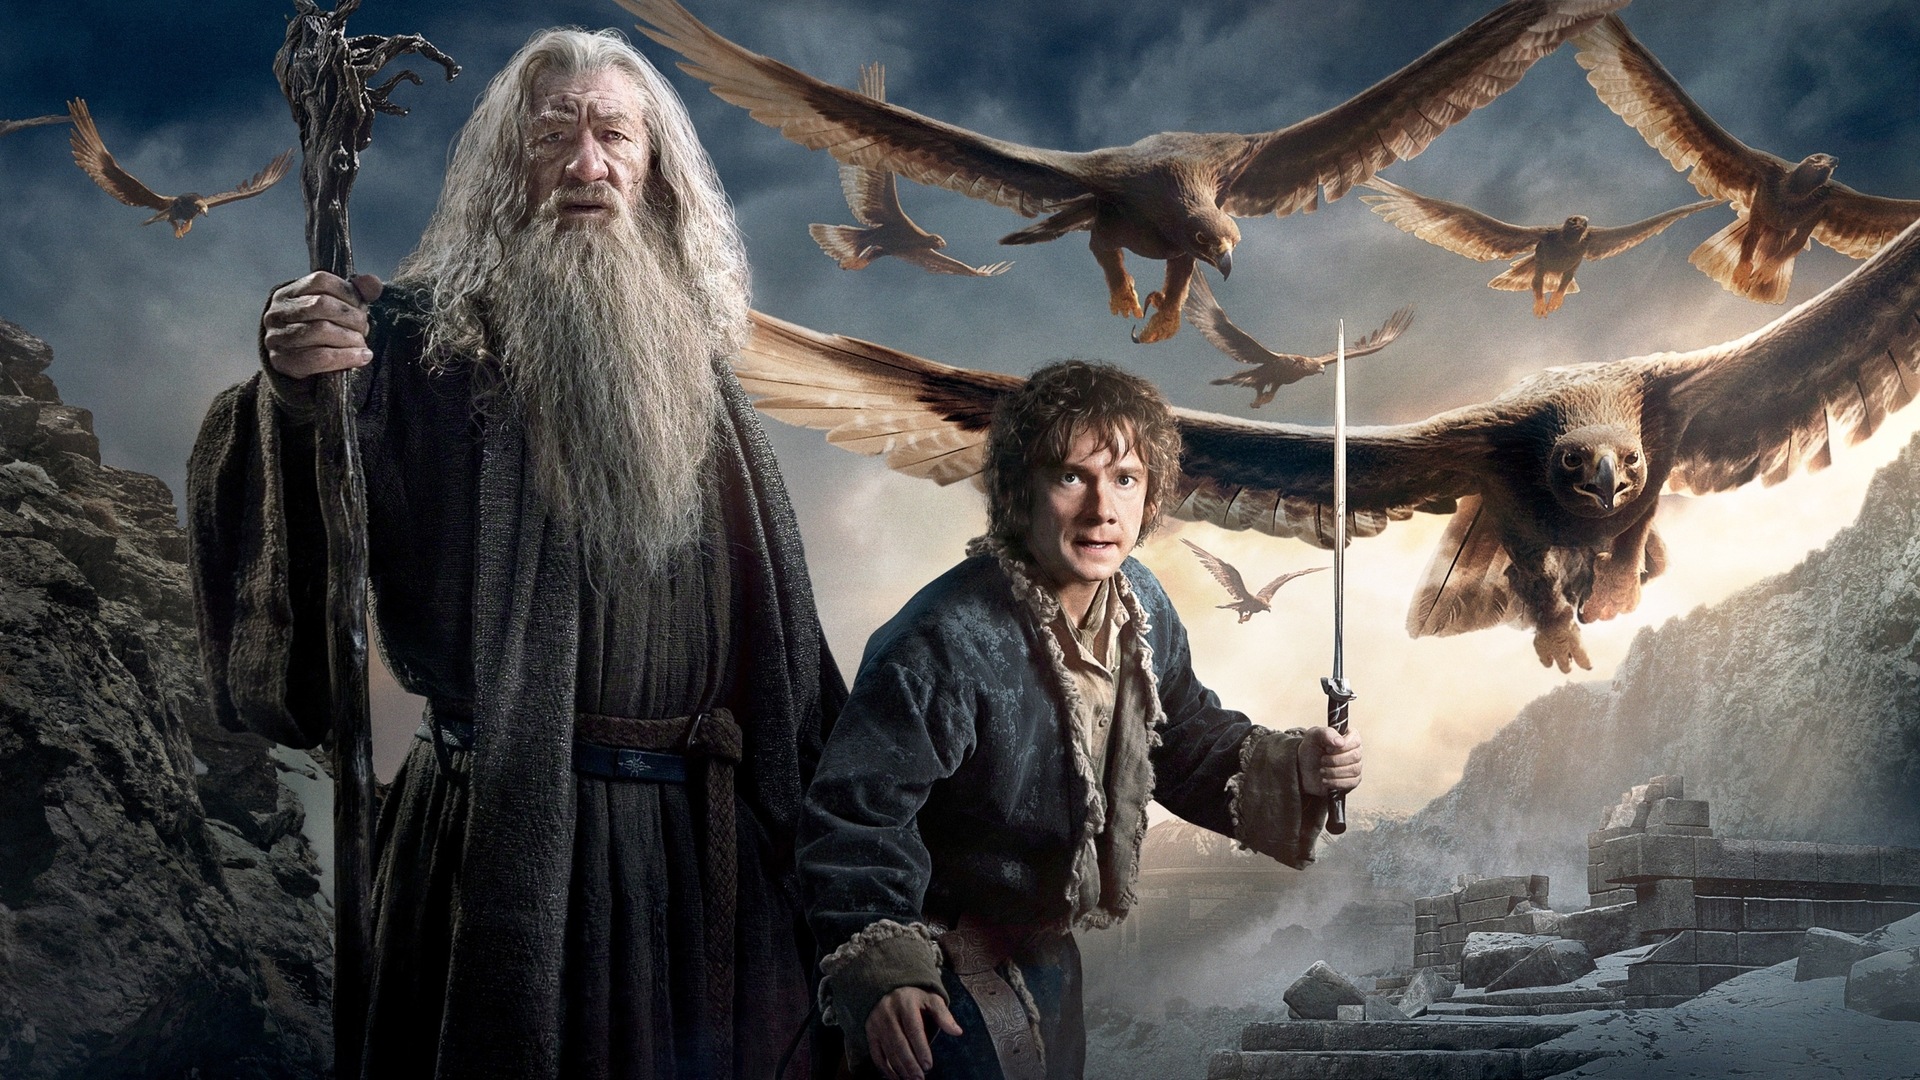 The Hobbit: The Battle of the Five Armies, movie HD wallpapers #4 - 1920x1080